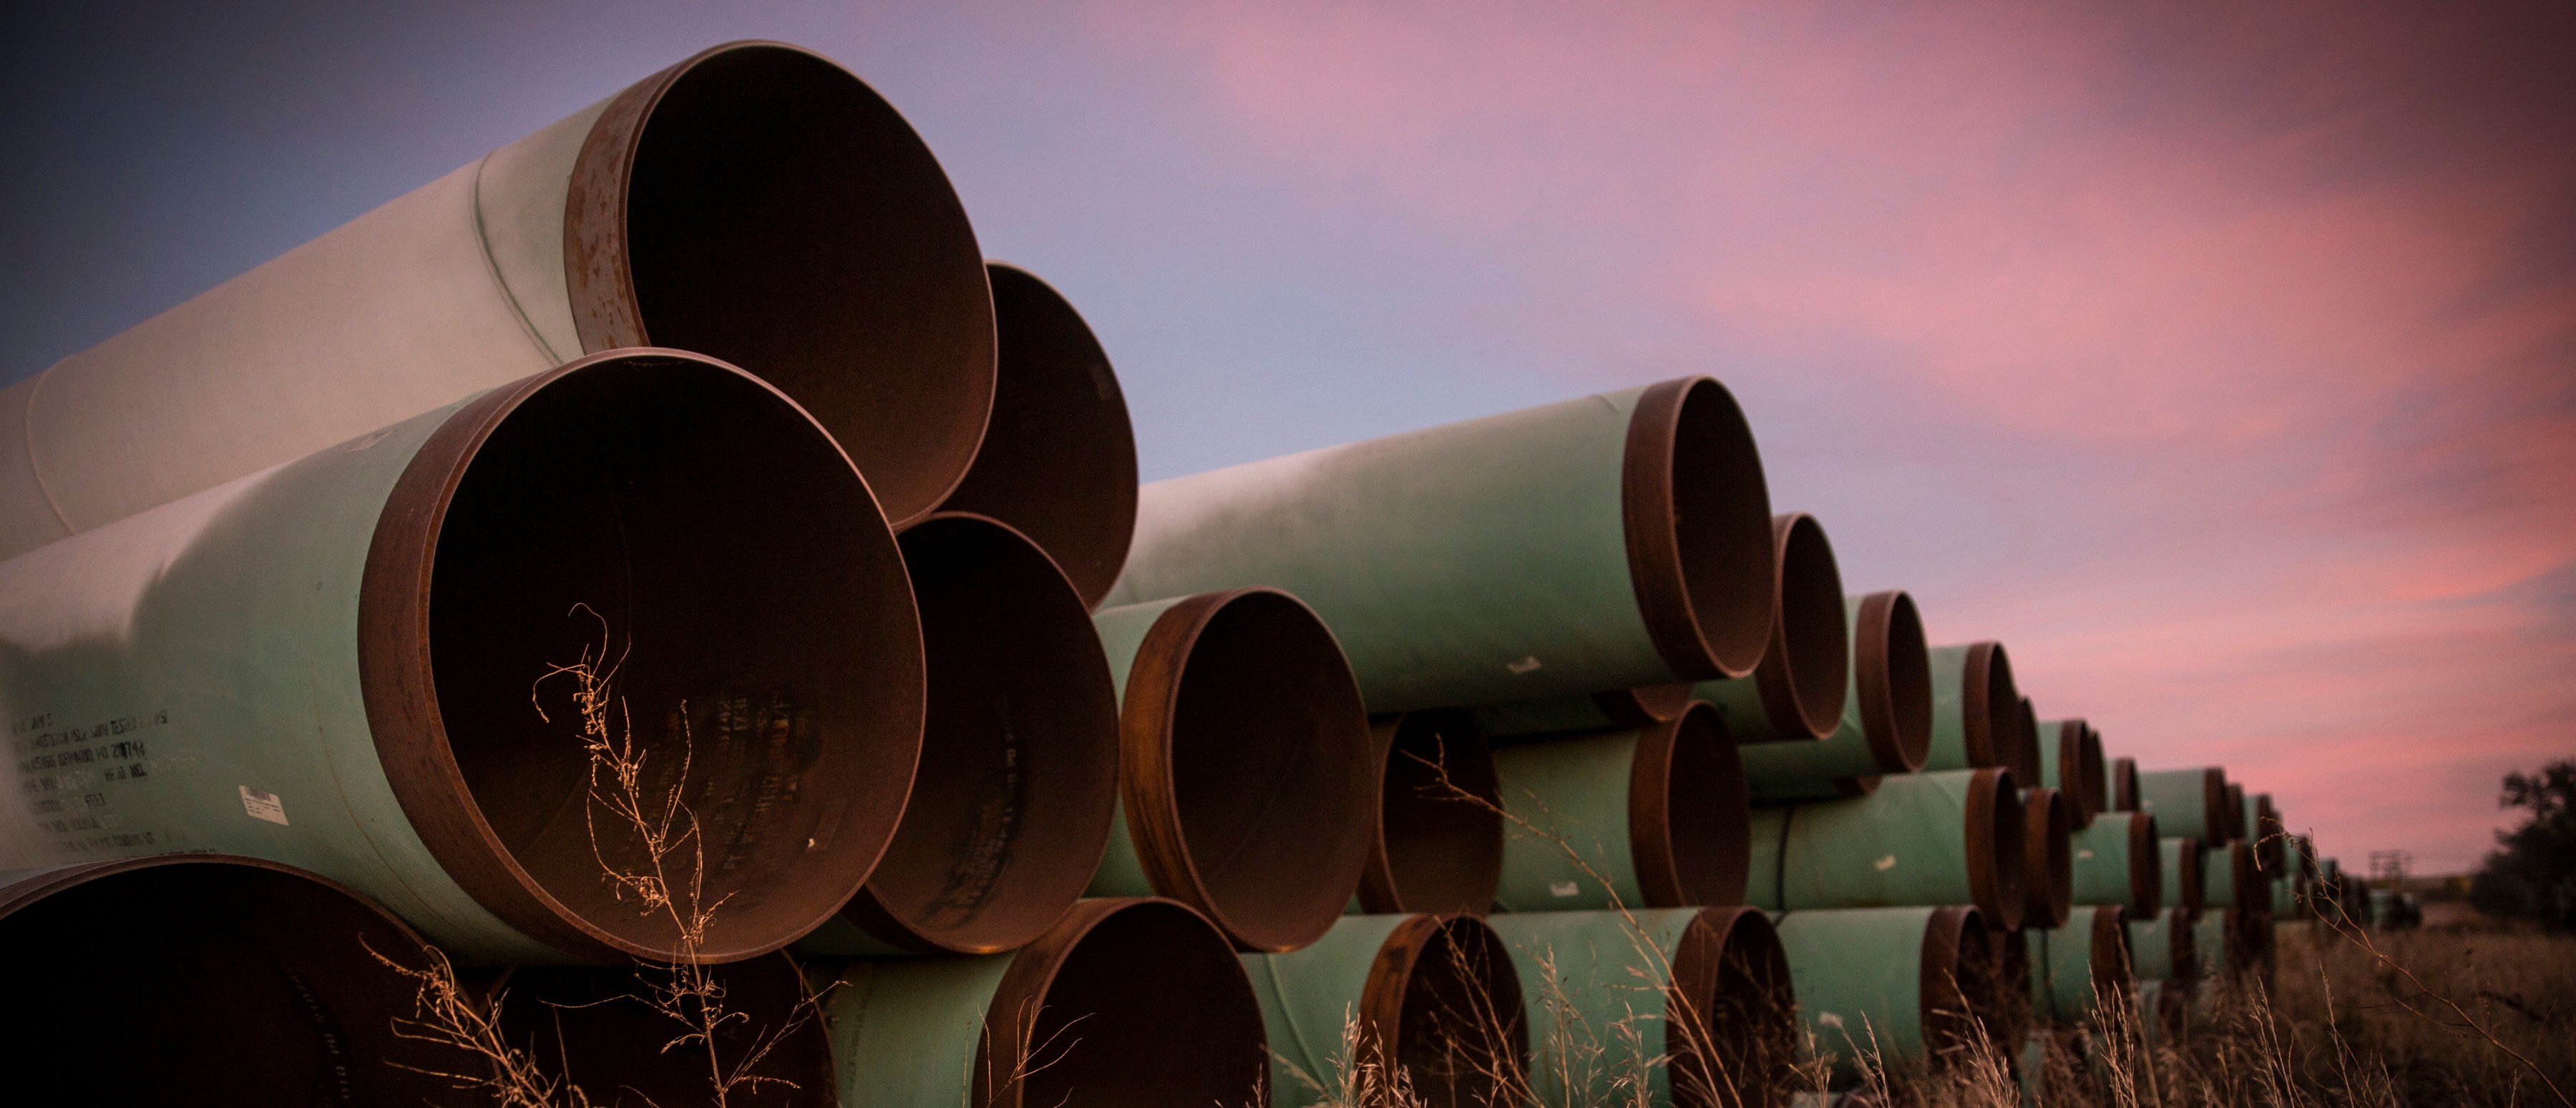 Keystone XL Pipeline To Be Scrapped Again | The Daily Caller